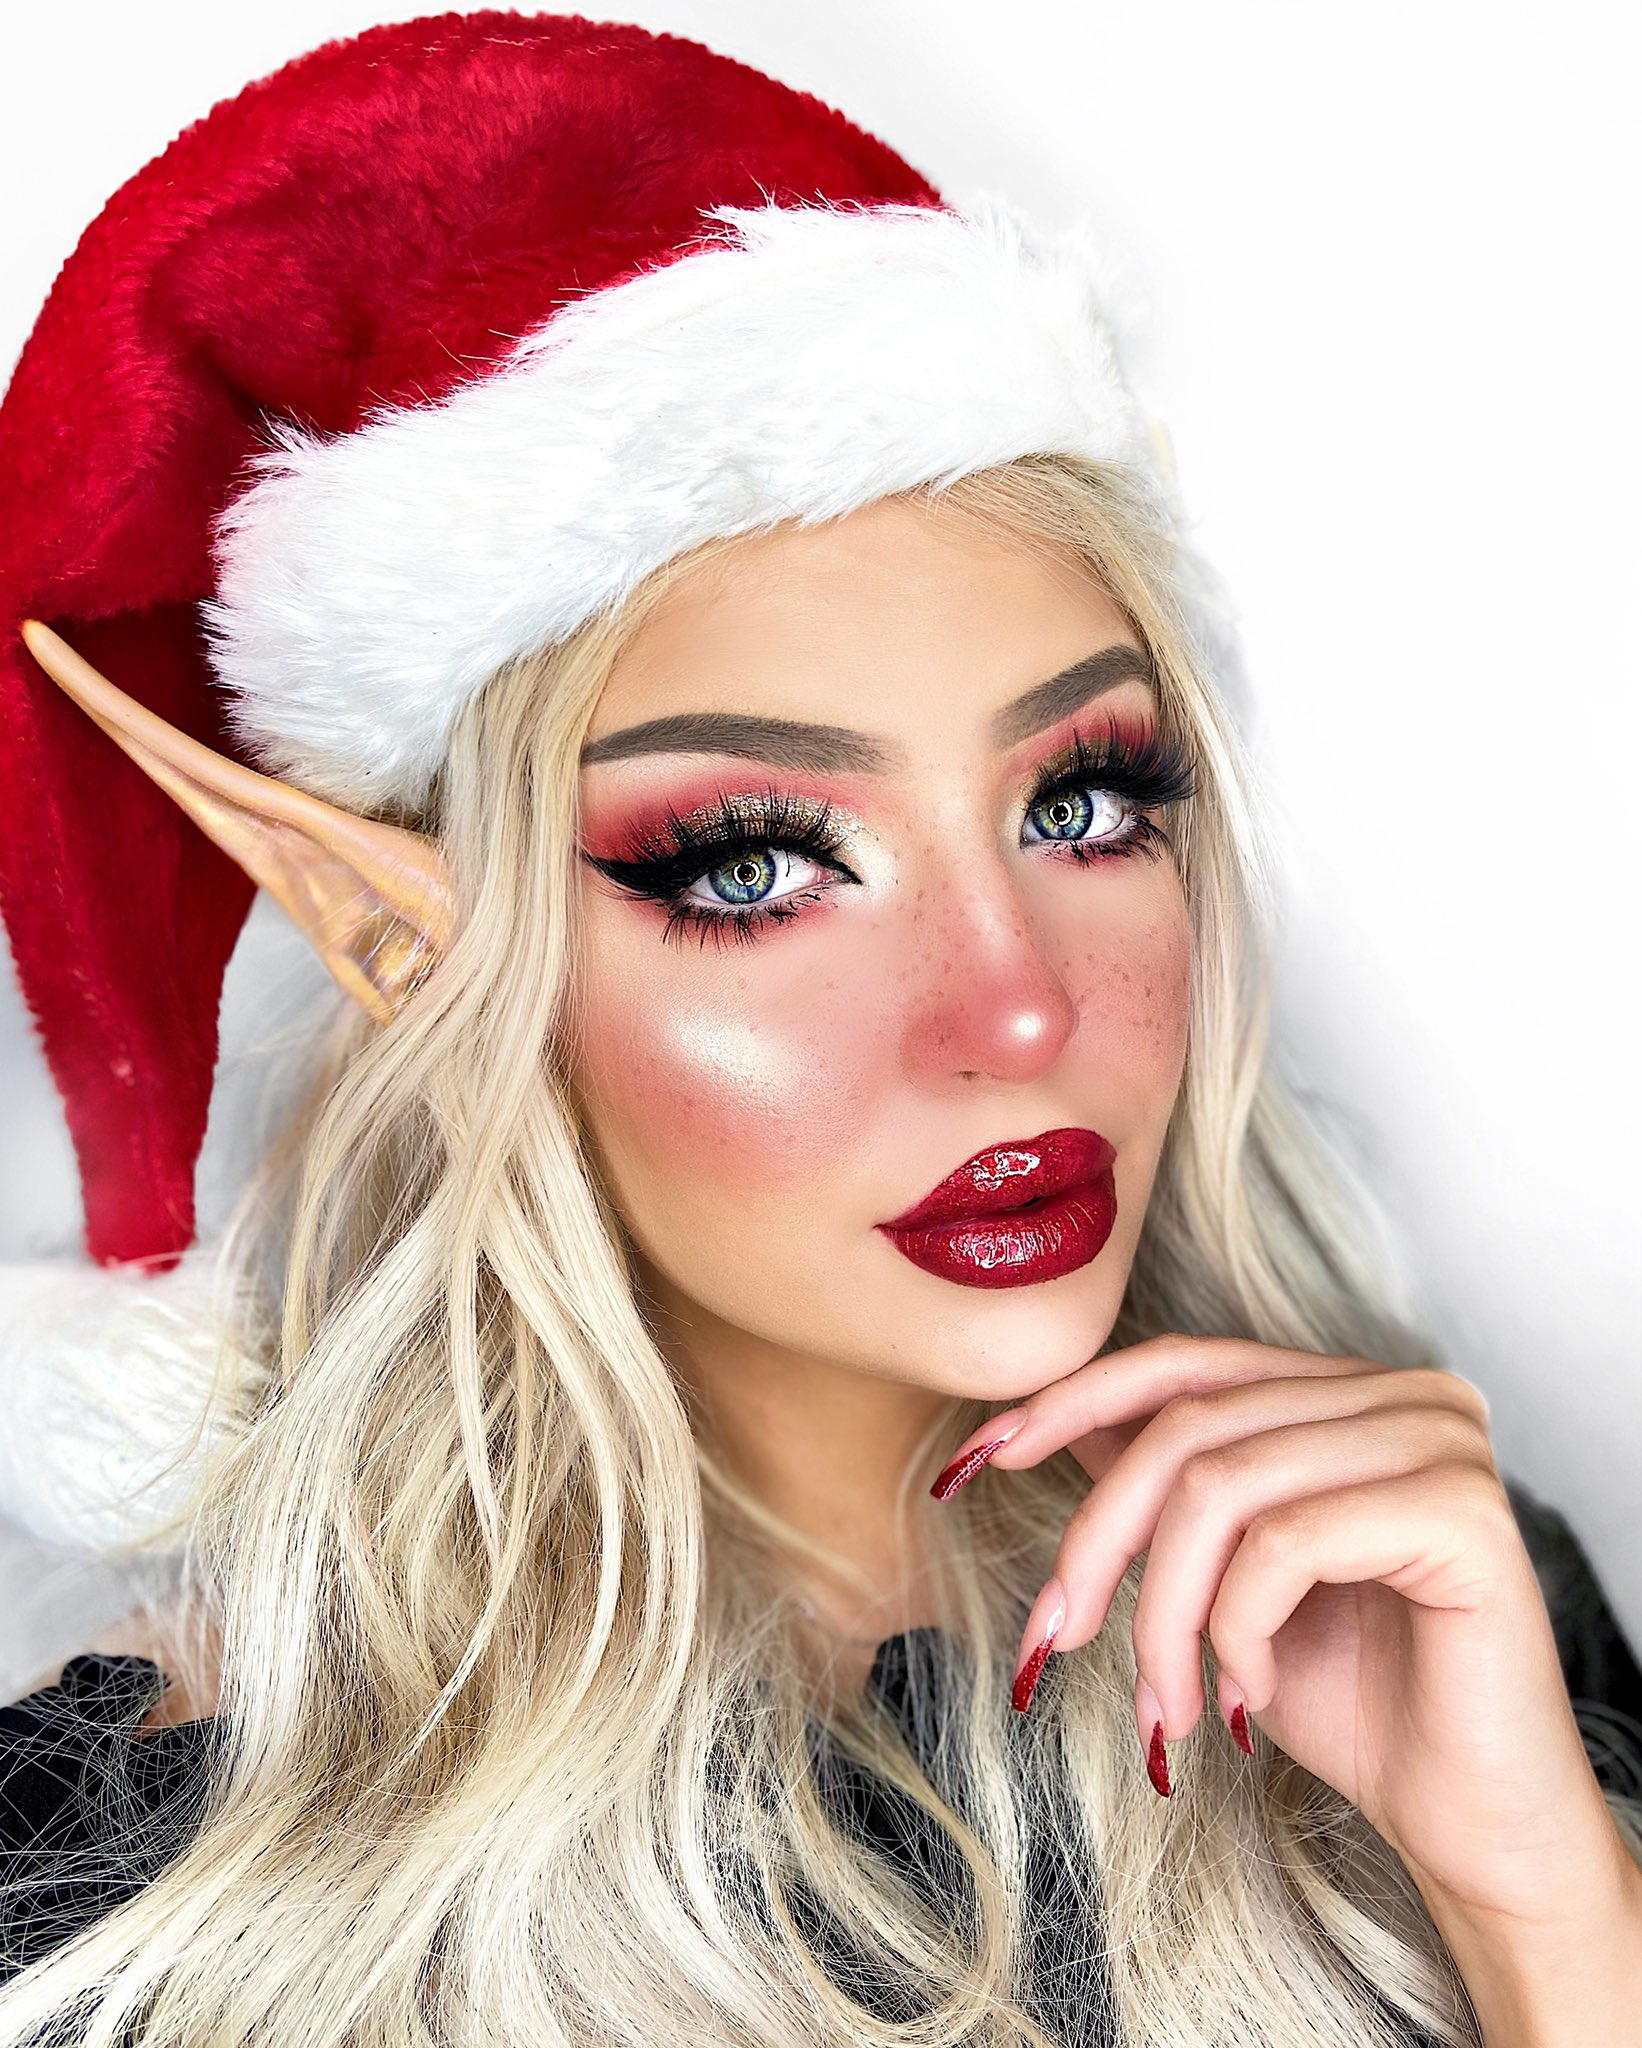 Makeup By Lilly Twitter: "𝓒𝓱𝓻𝓲𝓼𝓽𝓶𝓪𝓼 𝓔𝓵𝓯 🧝‍♀️ make it glam✨ #makeup #christmasmakeup #MorpheBabe https://t.co/Spy9fvuQOy" Twitter